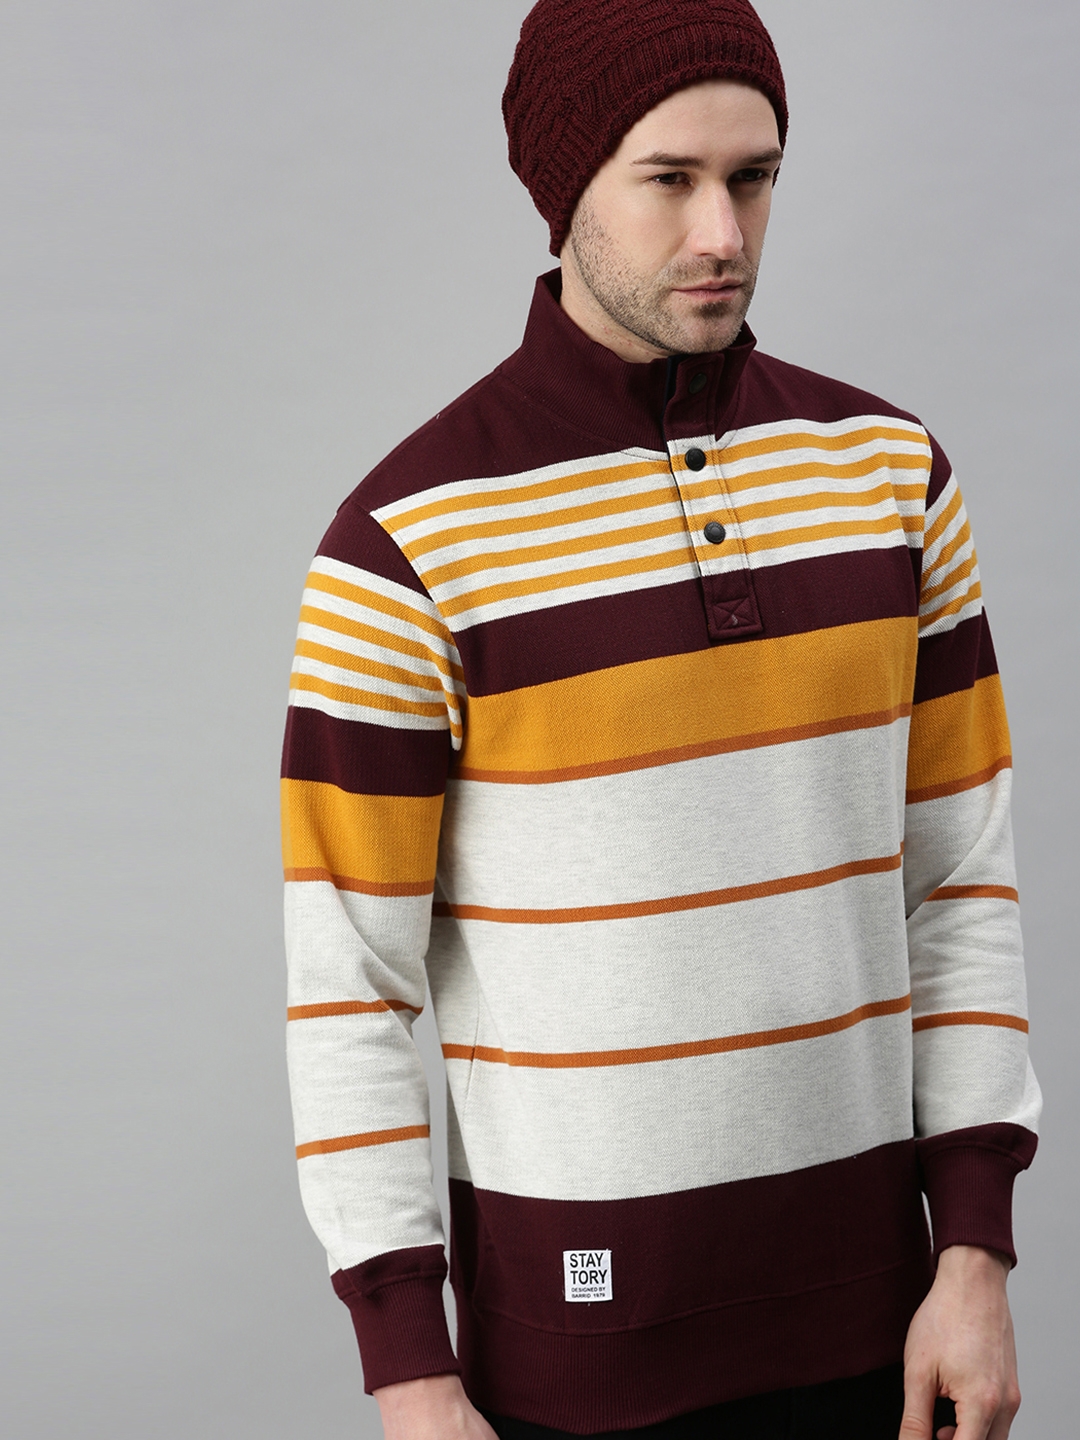 Showoff Men's Cotton Casual Grey and Maroon Striped Sweatshirt